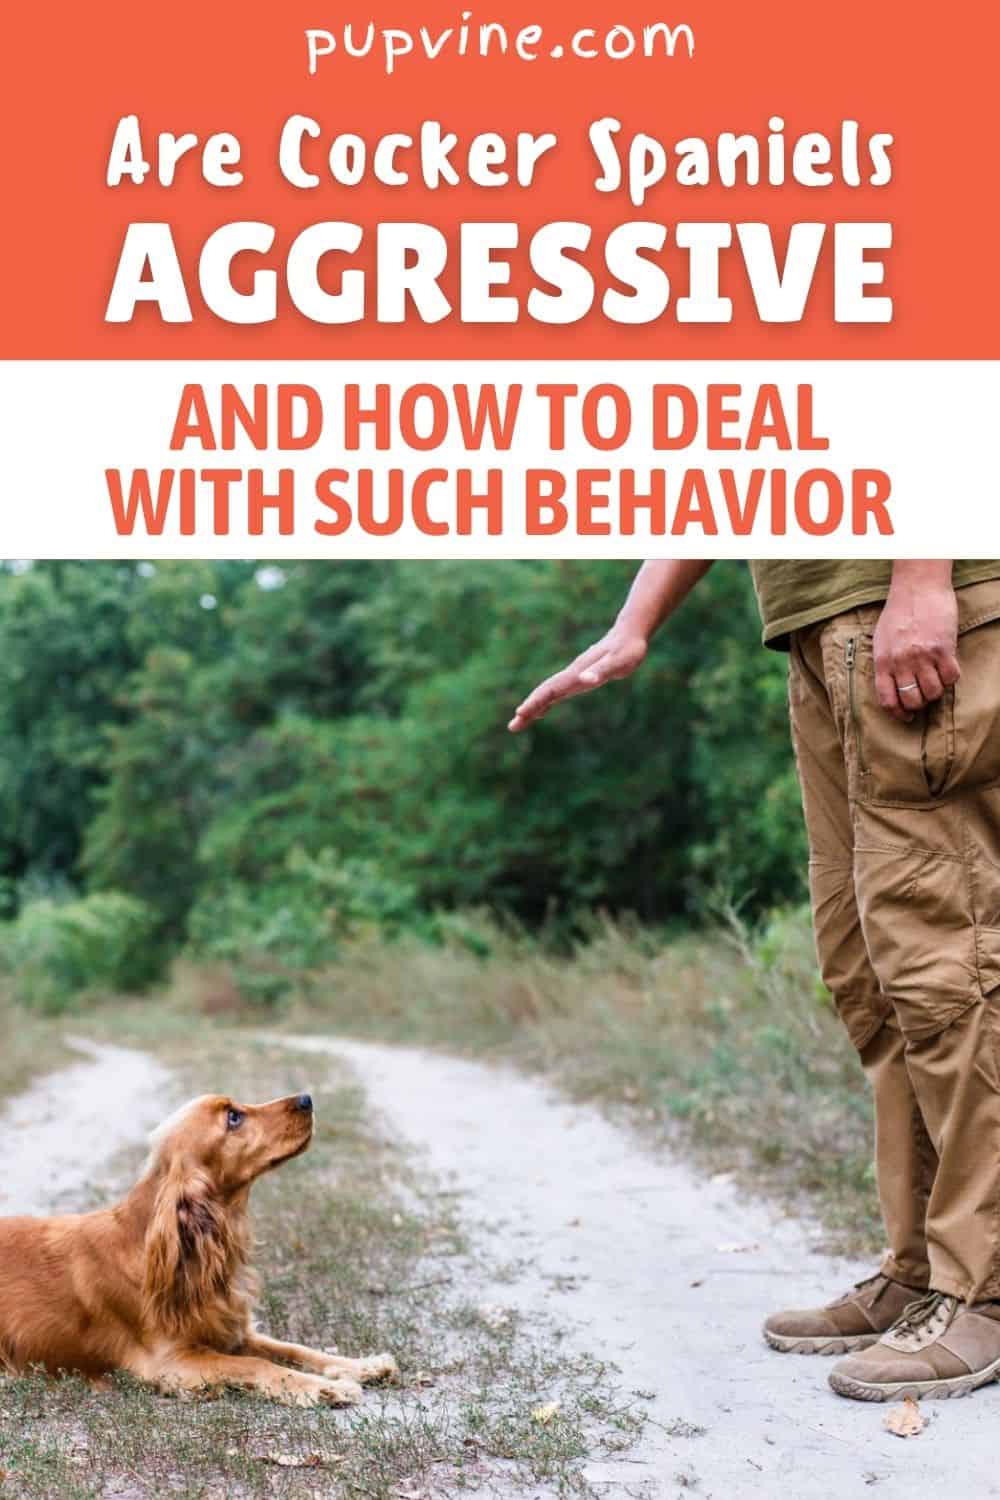 Are Cocker Spaniels Aggressive And How To Deal With Such Behavior